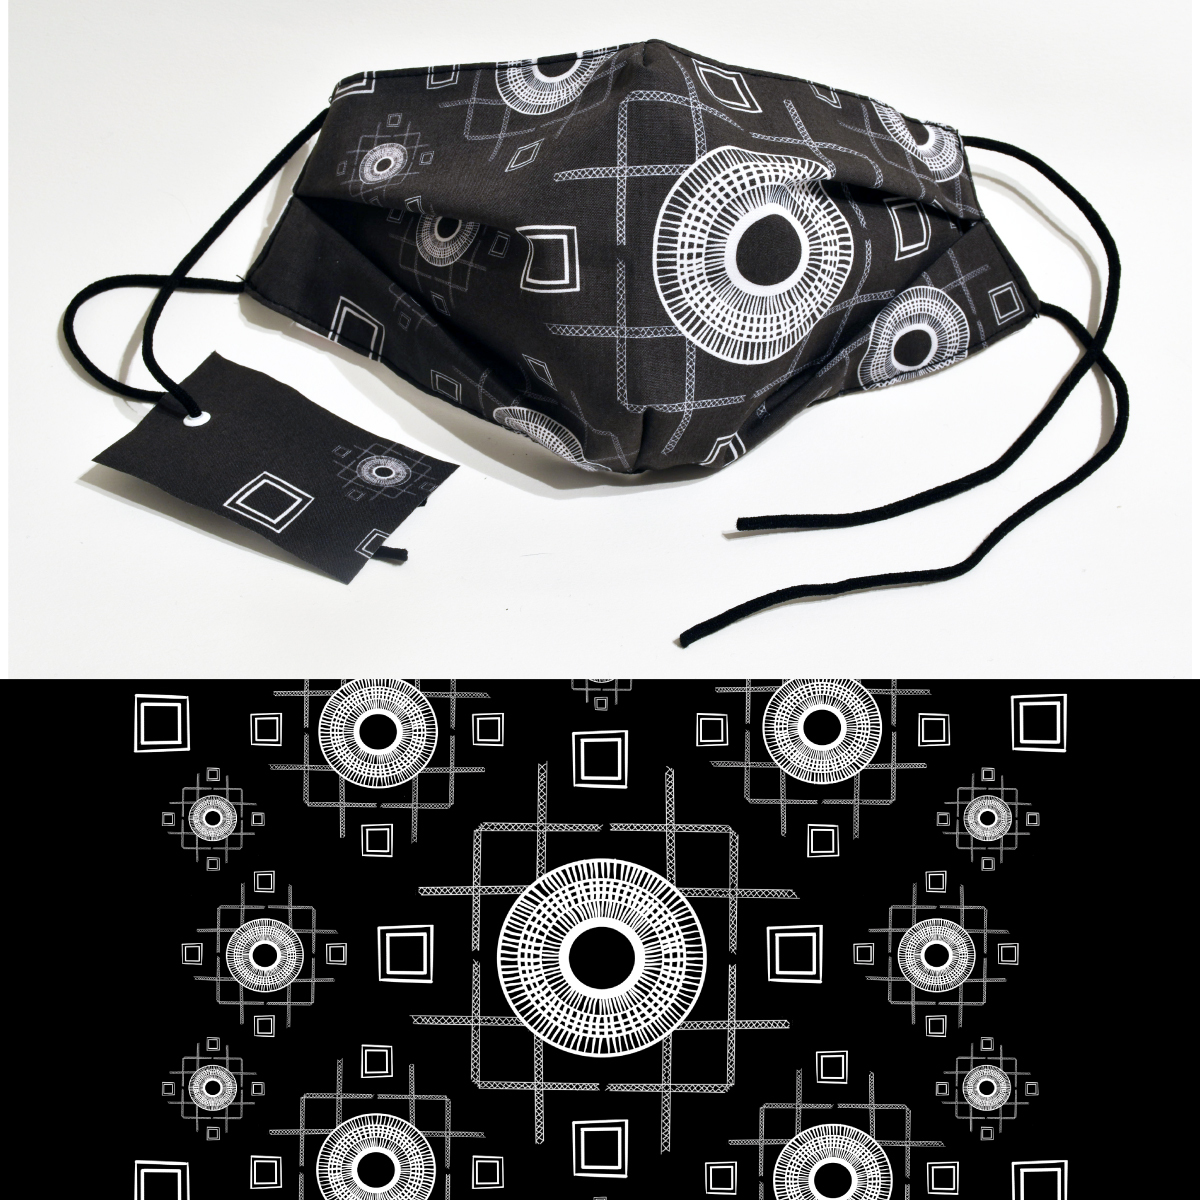 Photo of a fabric mask above a detail image of the fabric pattern, a geometric pattern of circular shapes and grids in white on a black background.